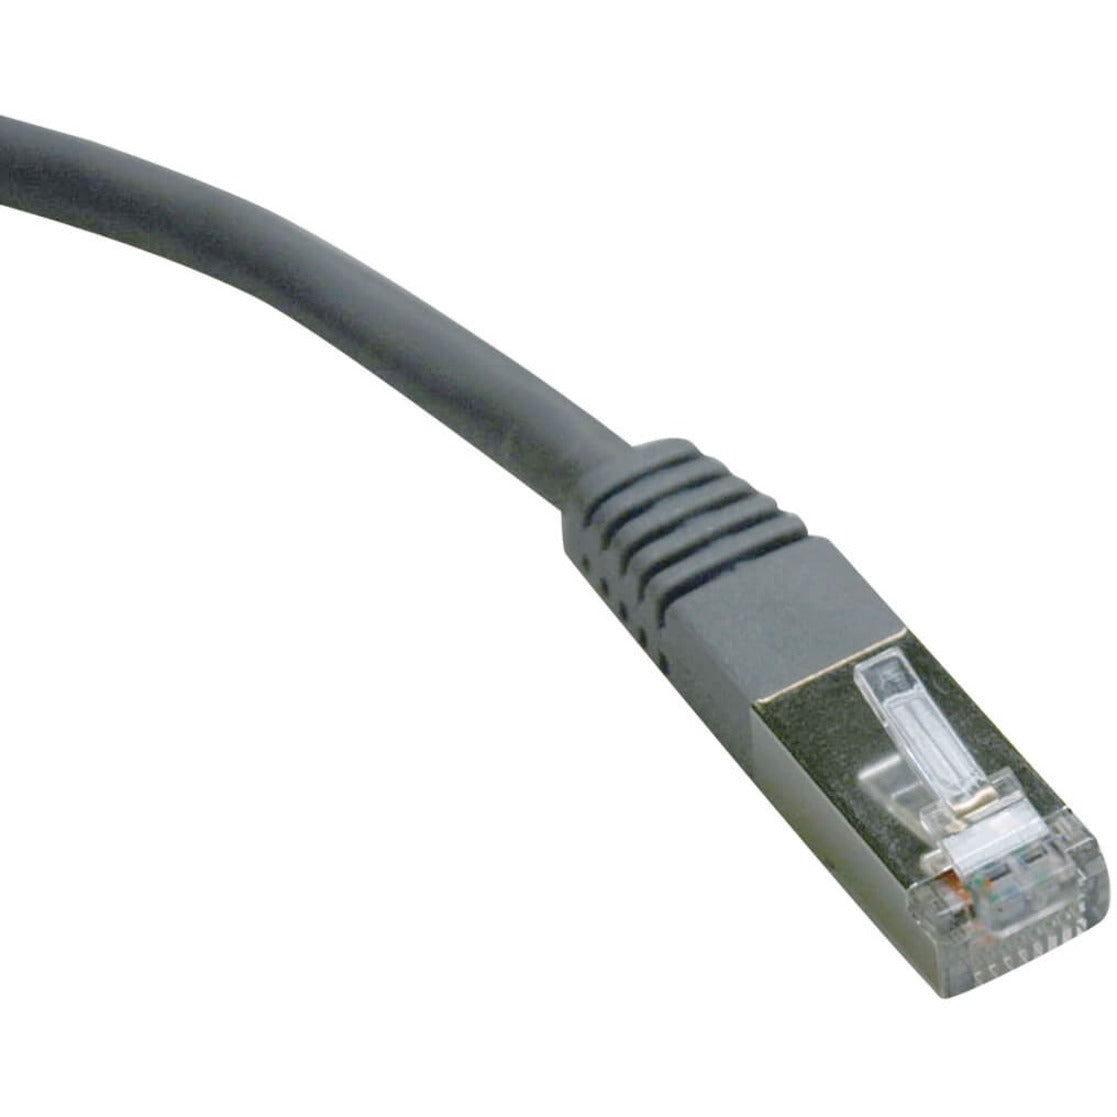 Tripp Lite N125-010-GY Cat6 FTP Patch Cable, 10ft Gray, EMI/RF Protection, Strain Relief